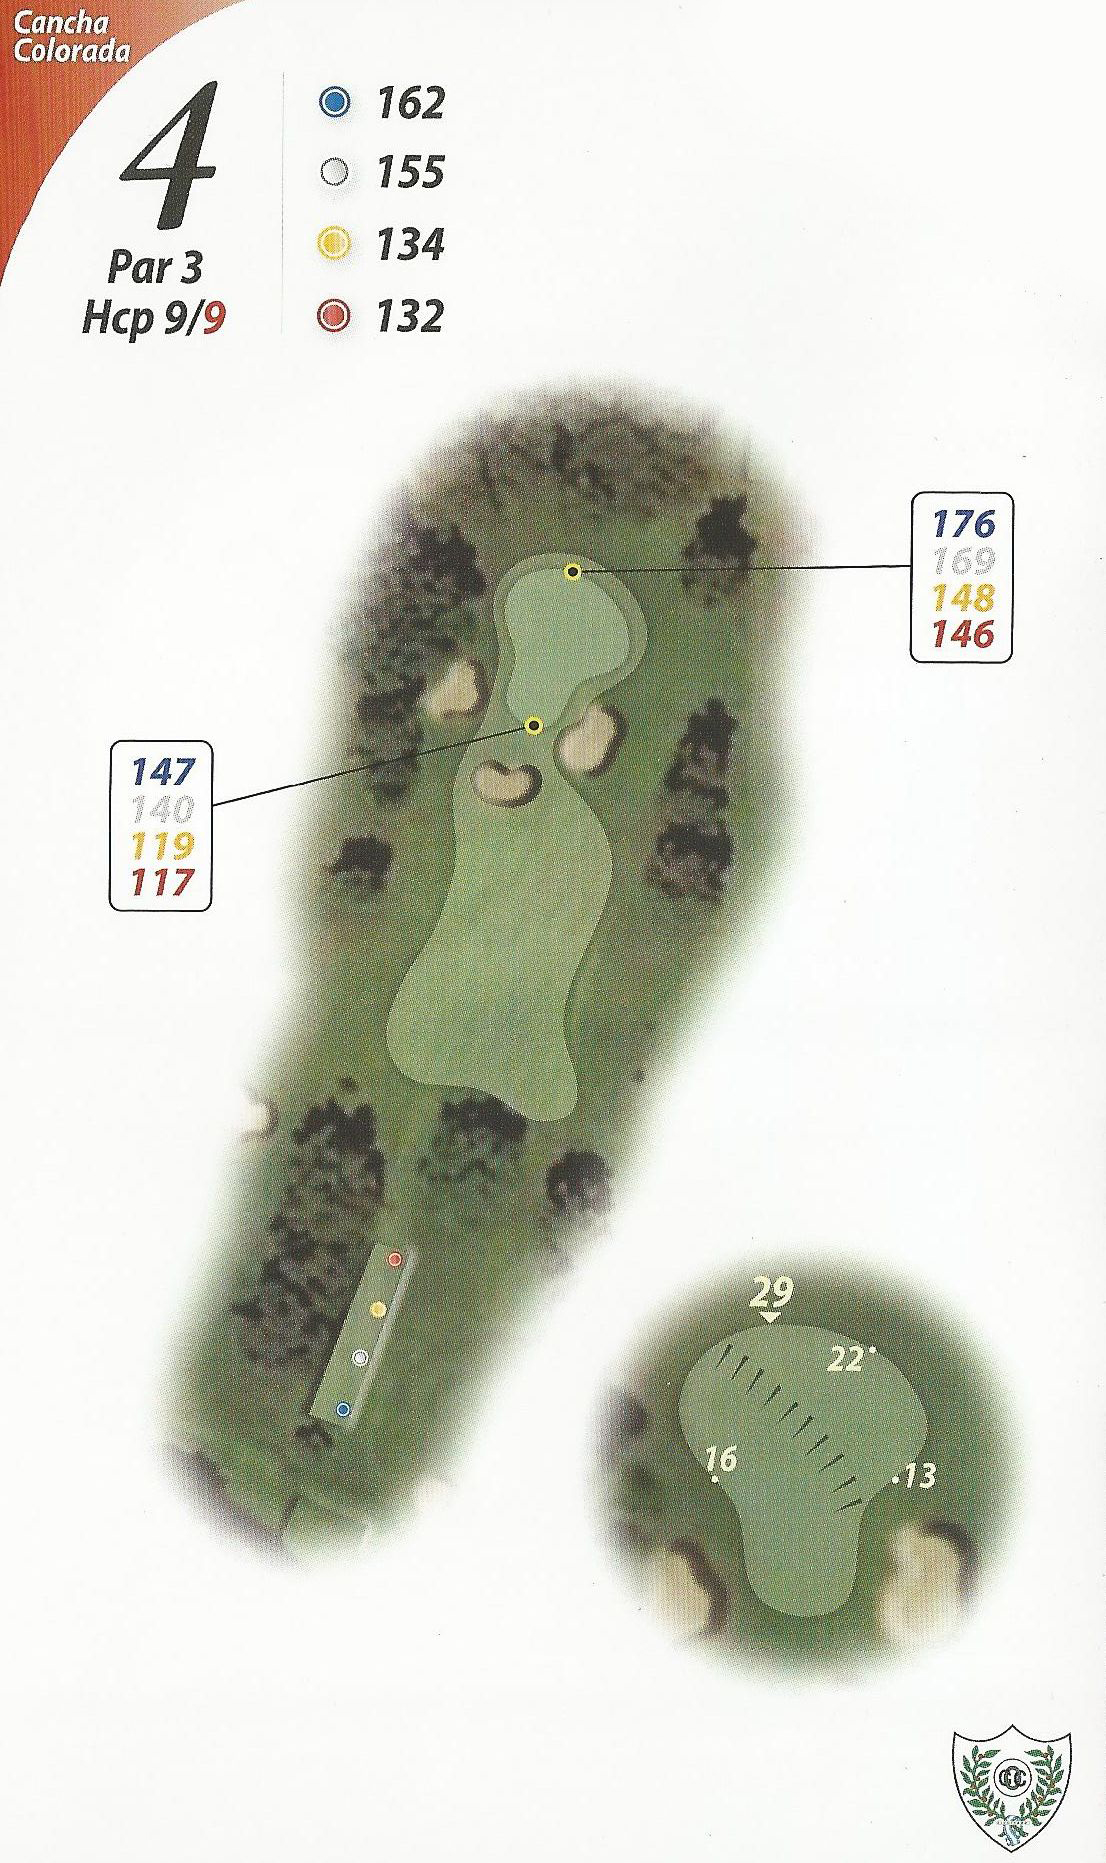 Hole 4 (red)